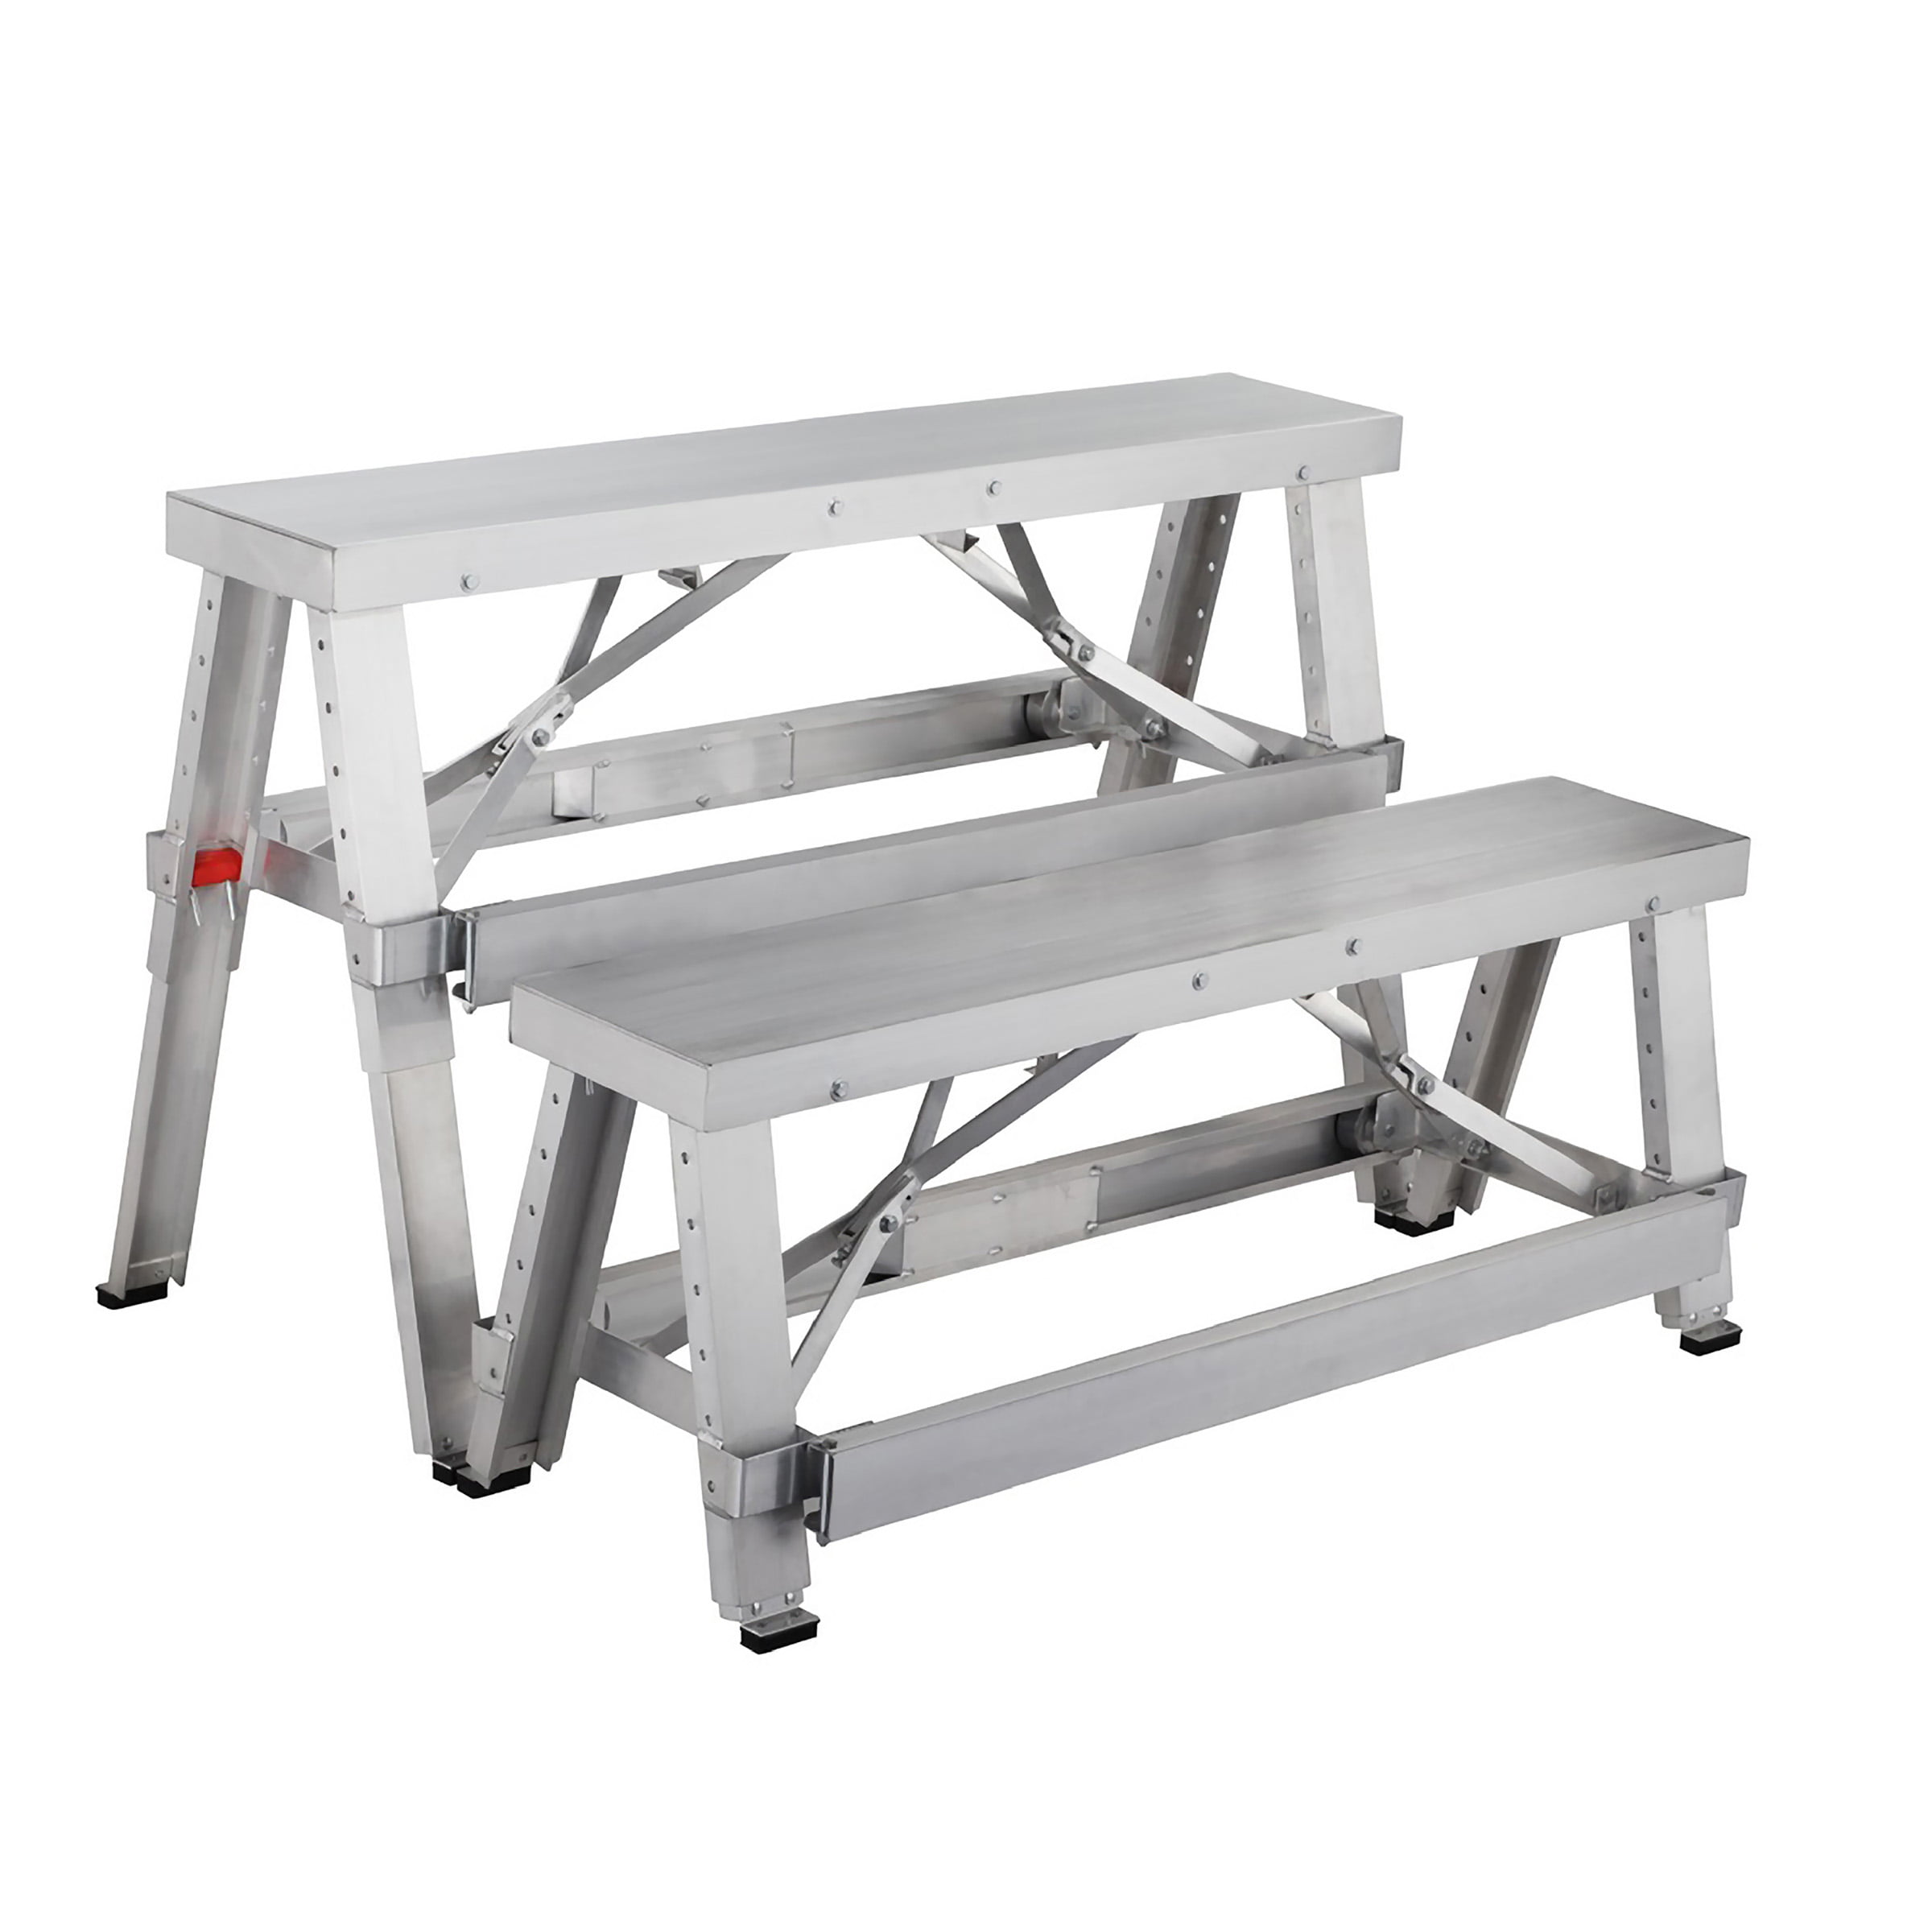 6120 Pentagon Tool Professional Quality Aluminum Drywall Bench With Adjustable Steps And Functions As A Workbench